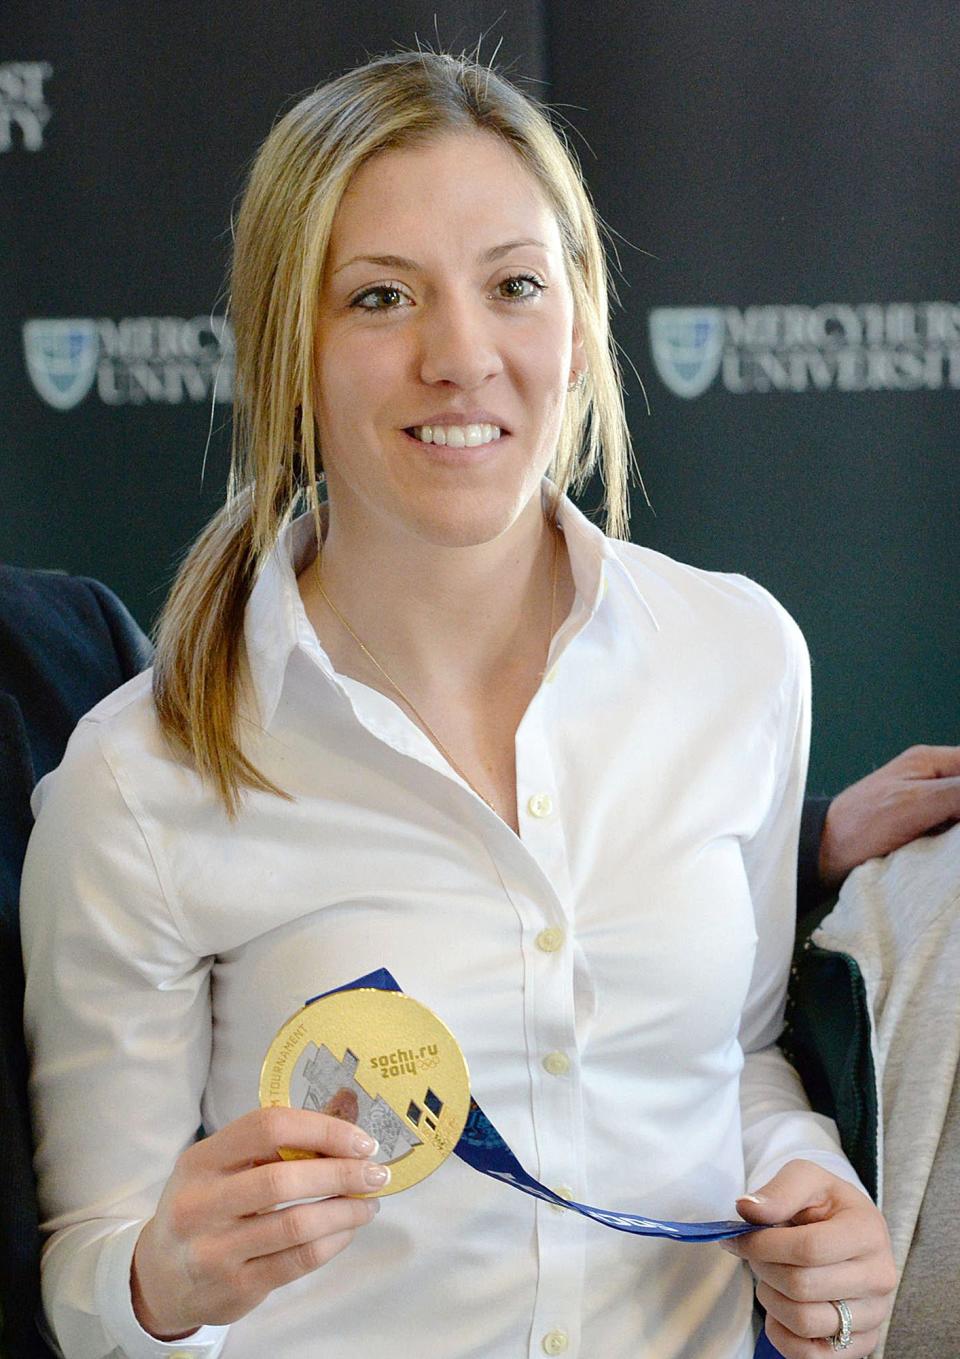 Three-time Olympic hockey gold medalist and former Mercyhurst University star Meghan Agosta-Marciano, then 27, displays her gold medal from Sochi, Russia during an autograph session at the Erie school on March 7, 2014. Agosta was a forward on the Division I Mercyhurst women's hockey team from 2006 -2011. She starred for the Canadian national hockey team, helping Team Canada win gold medals in Turin, Italy in 2006; Vancouver, Canada in 2010; Sochi, Russia in 2014 and a silver medal in Pyeongchang, South Korea in 2018. In Sochi, Agosta was Canada's top scorer with nine goals and six assists.